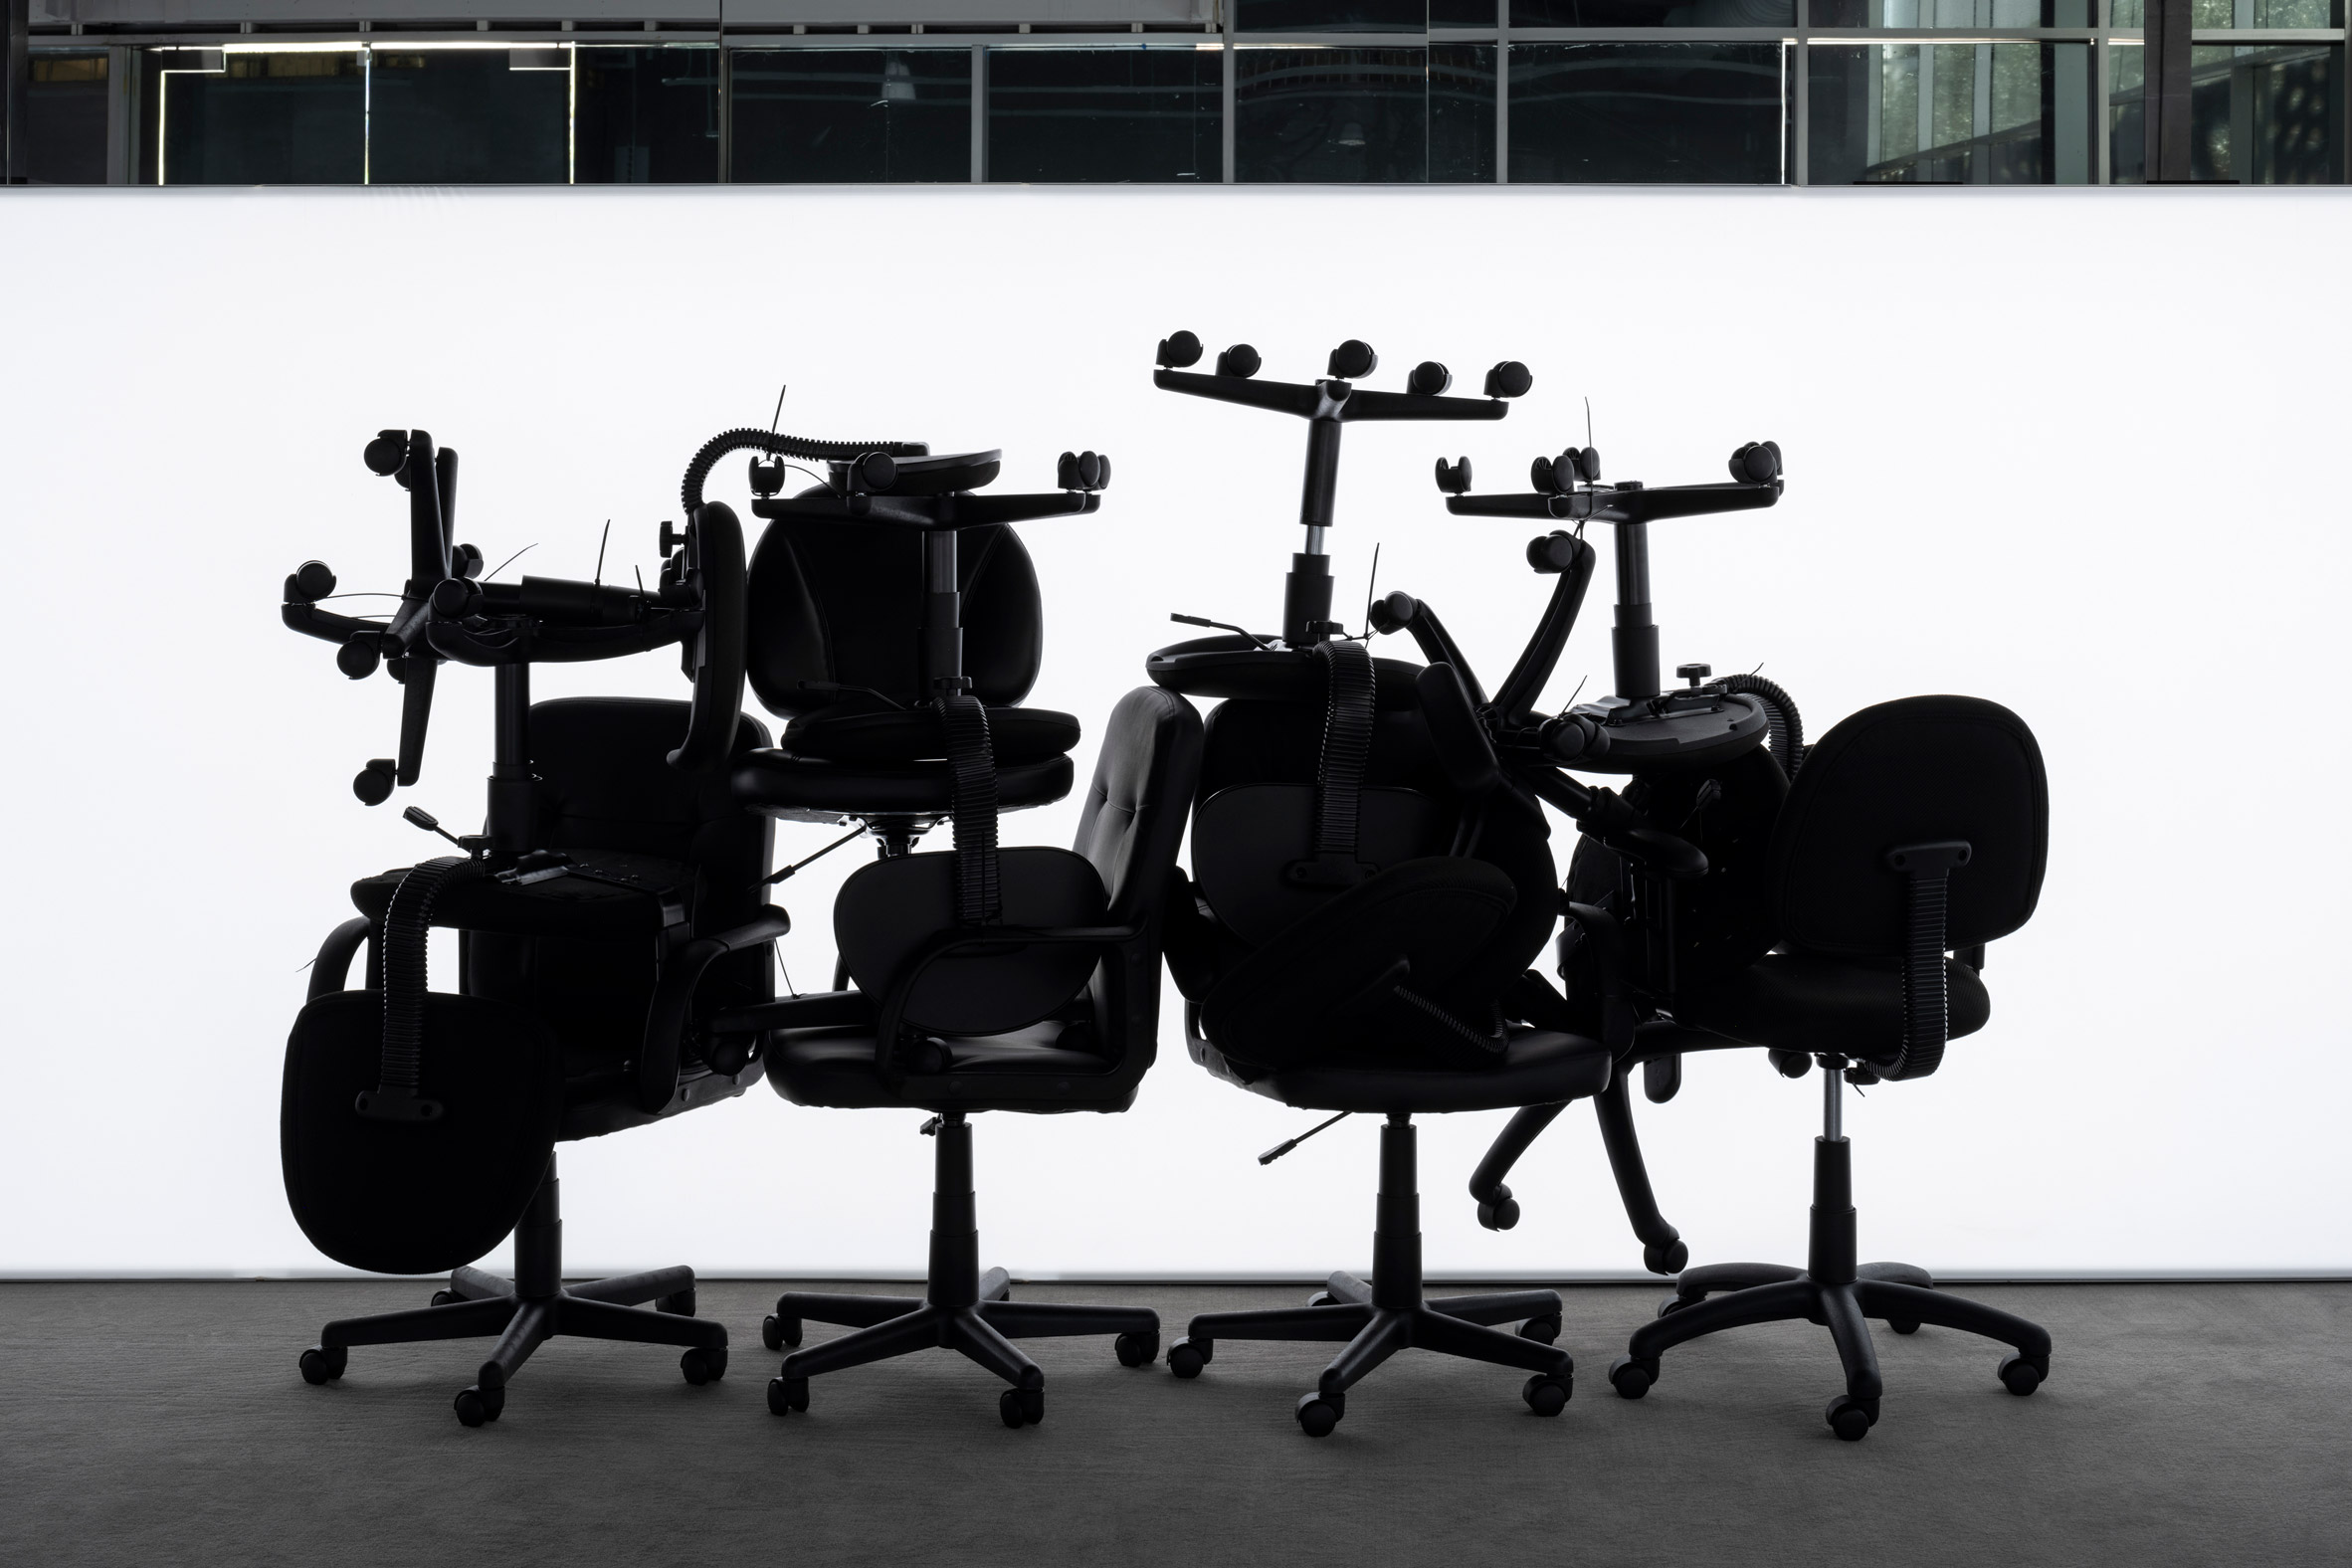 Pile of office chairs silhouetted against a bright light box